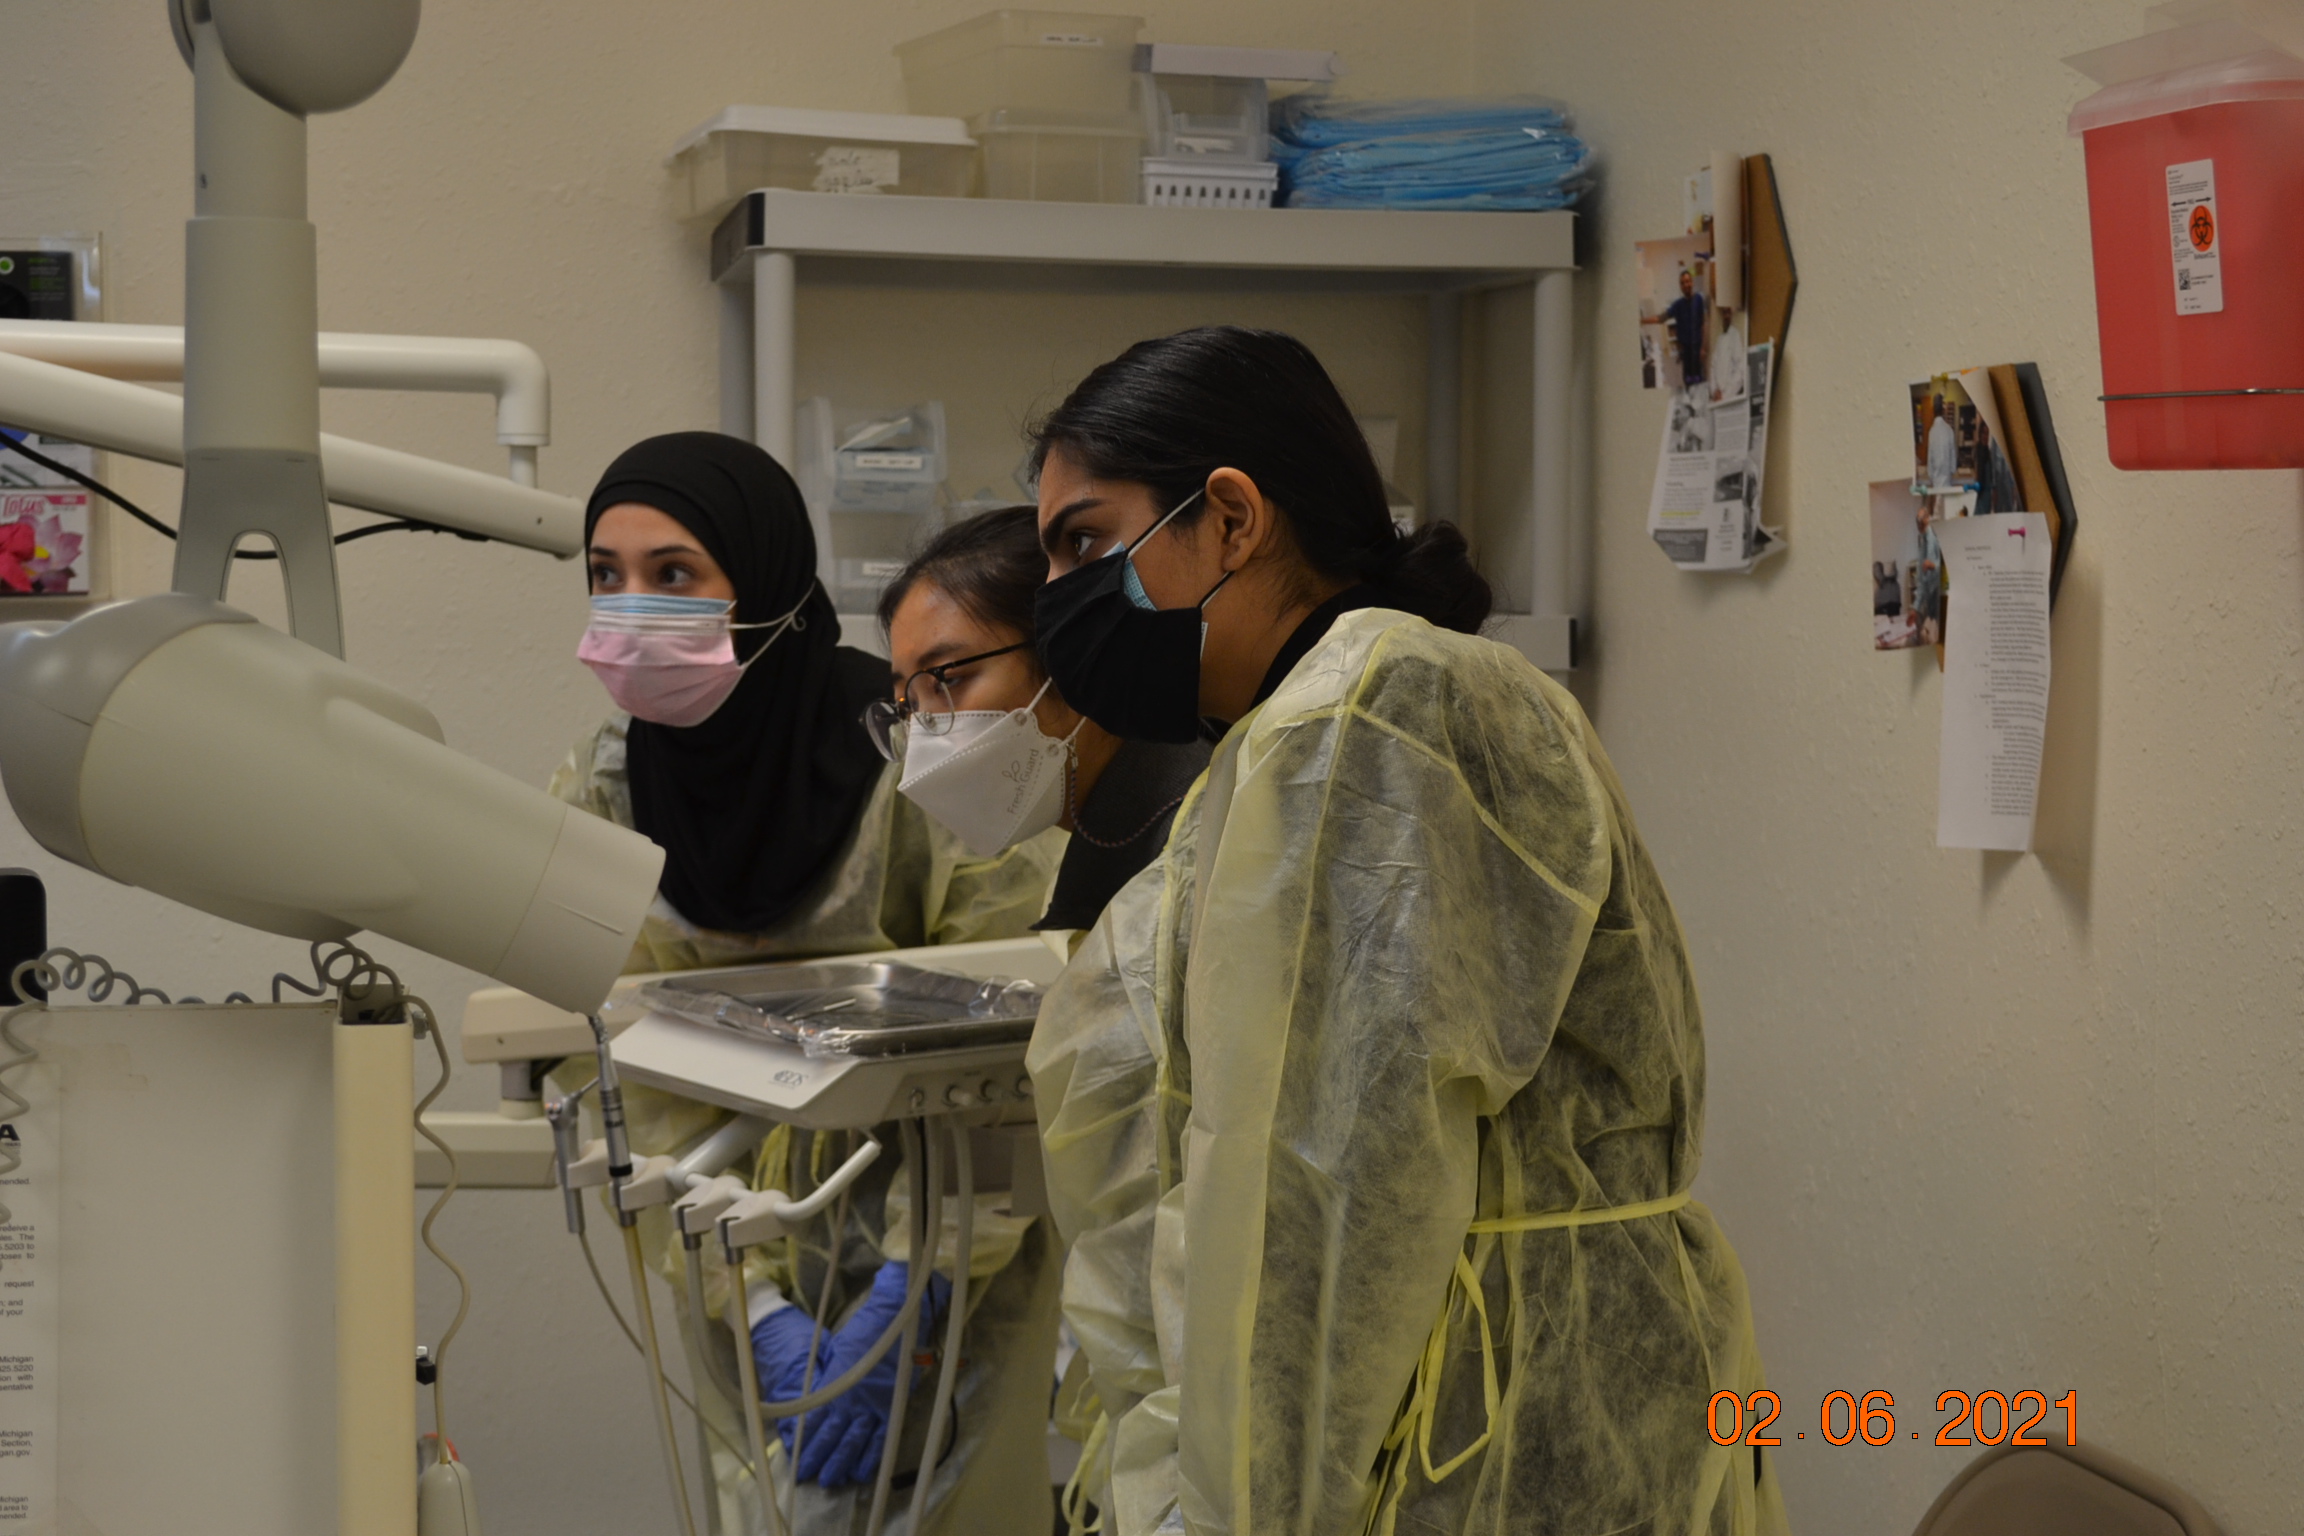 Dental students providing care for a patient at the HUDA Clinic.